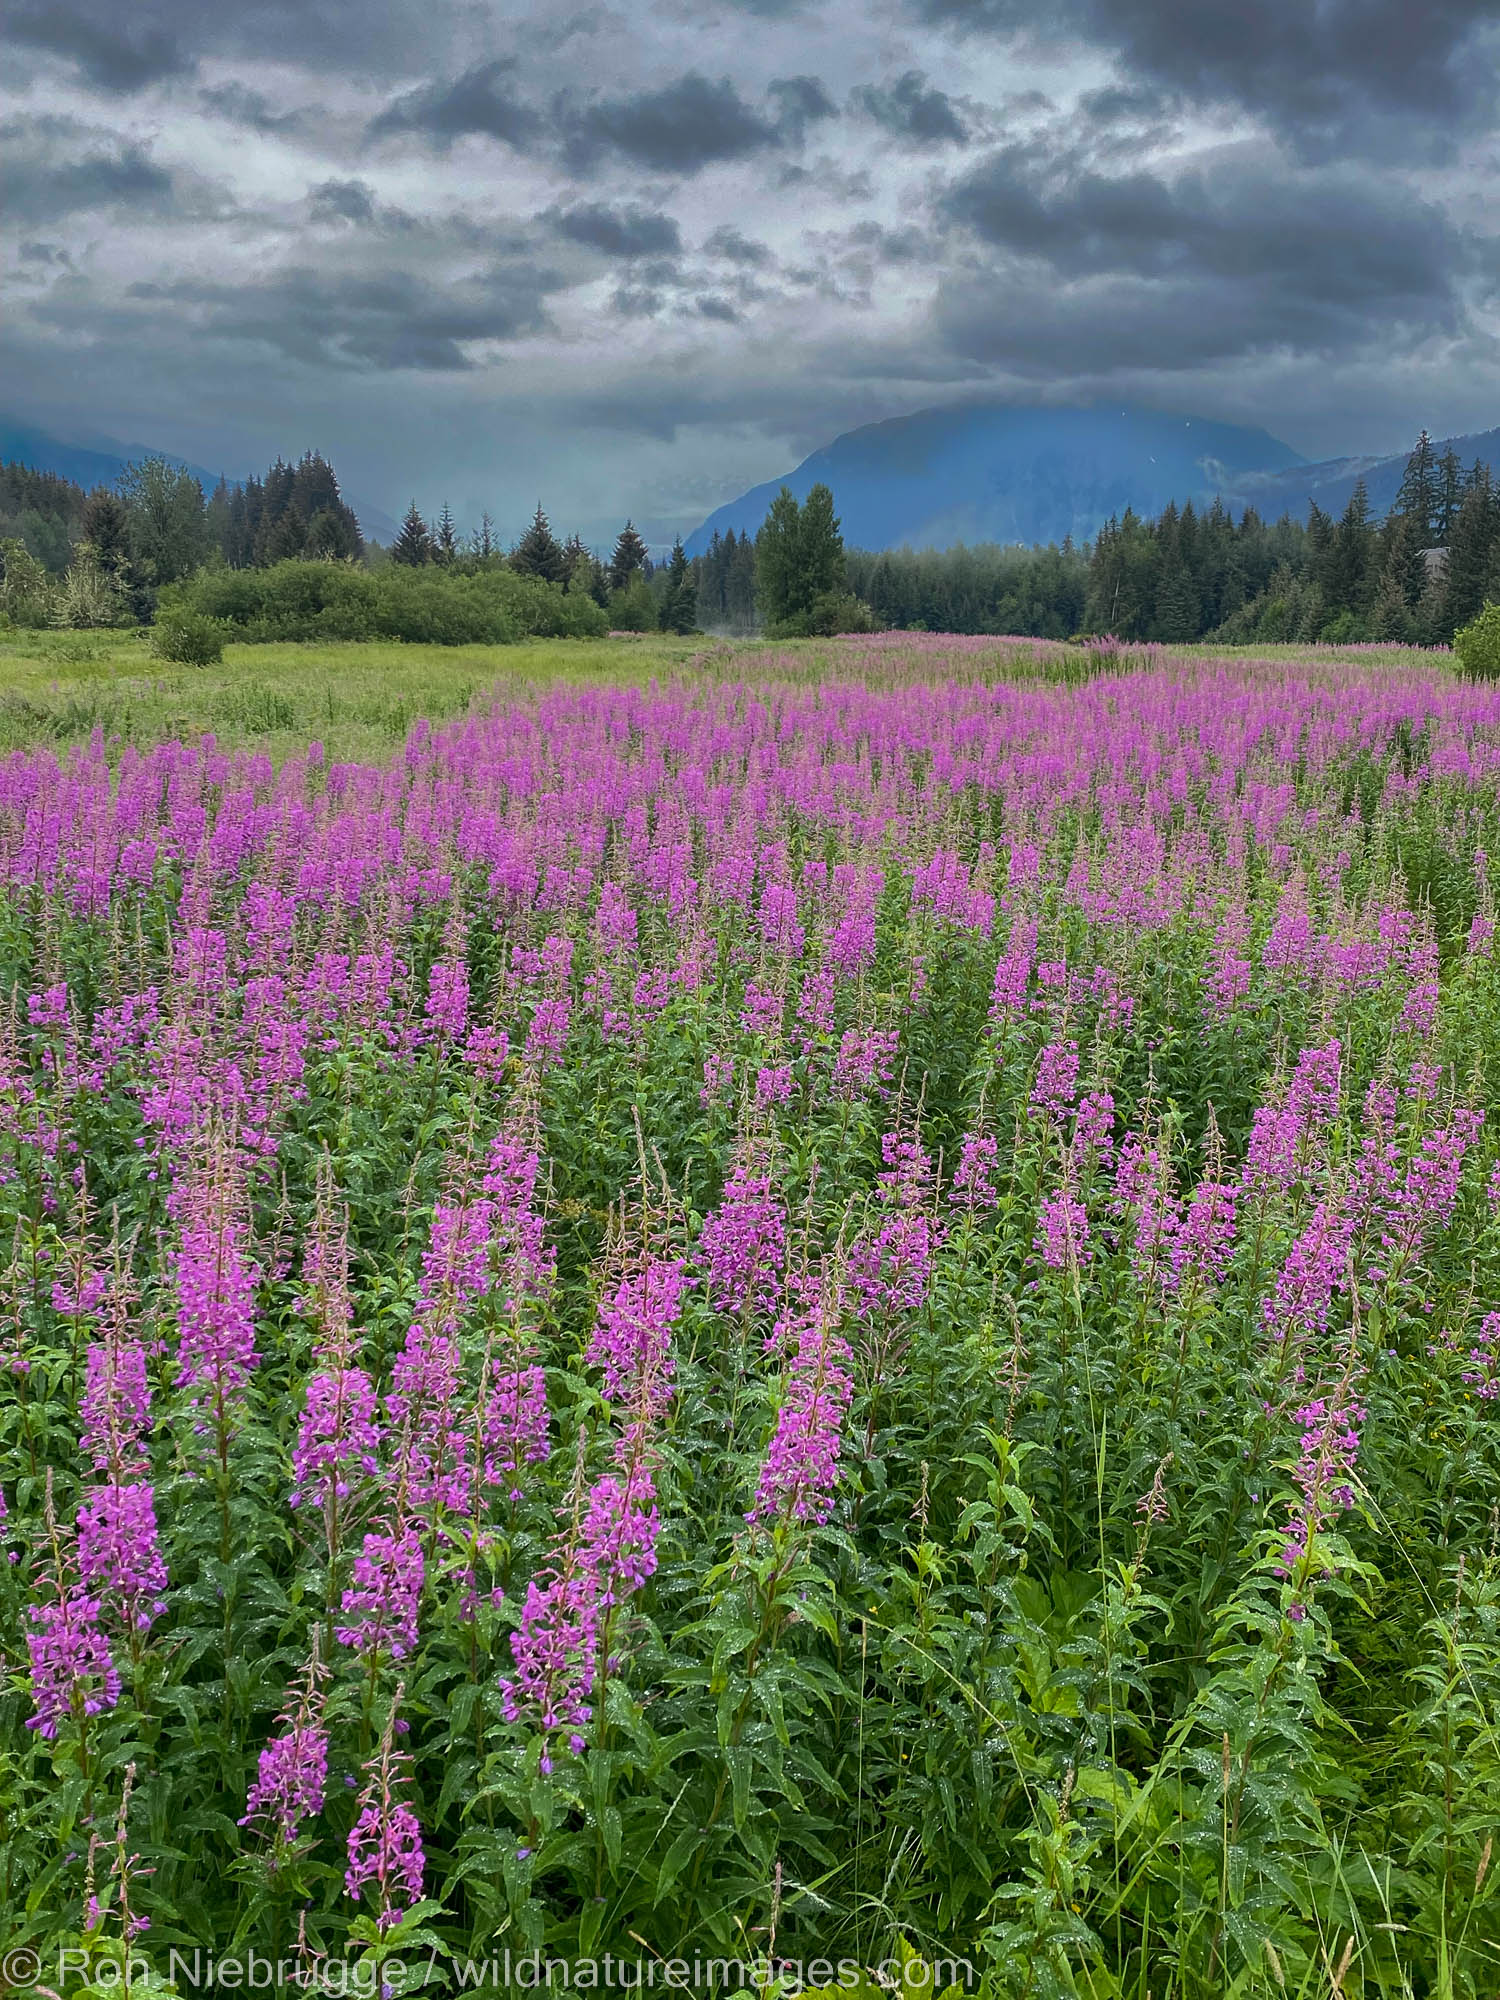 Fireweed near Mendenhall Glacier, Tongass National Forest, Alaska.  Iphone photo.